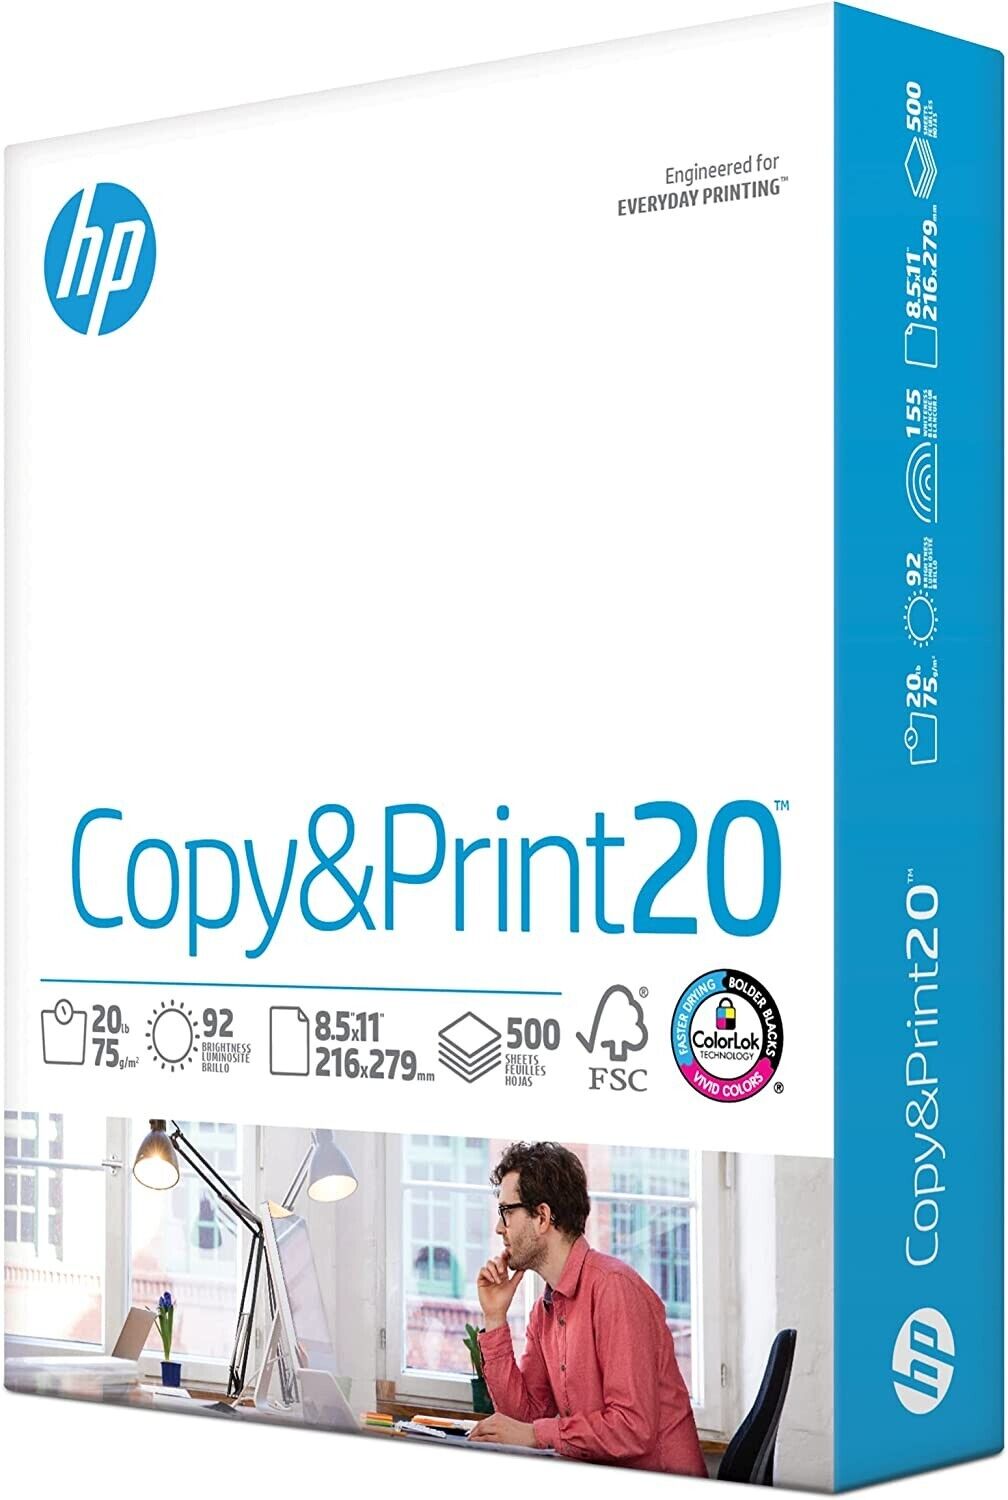 HP Printer Paper Office 20 8.5 x 11 Copy Print Letter Size 1 Ream 500 Sheets